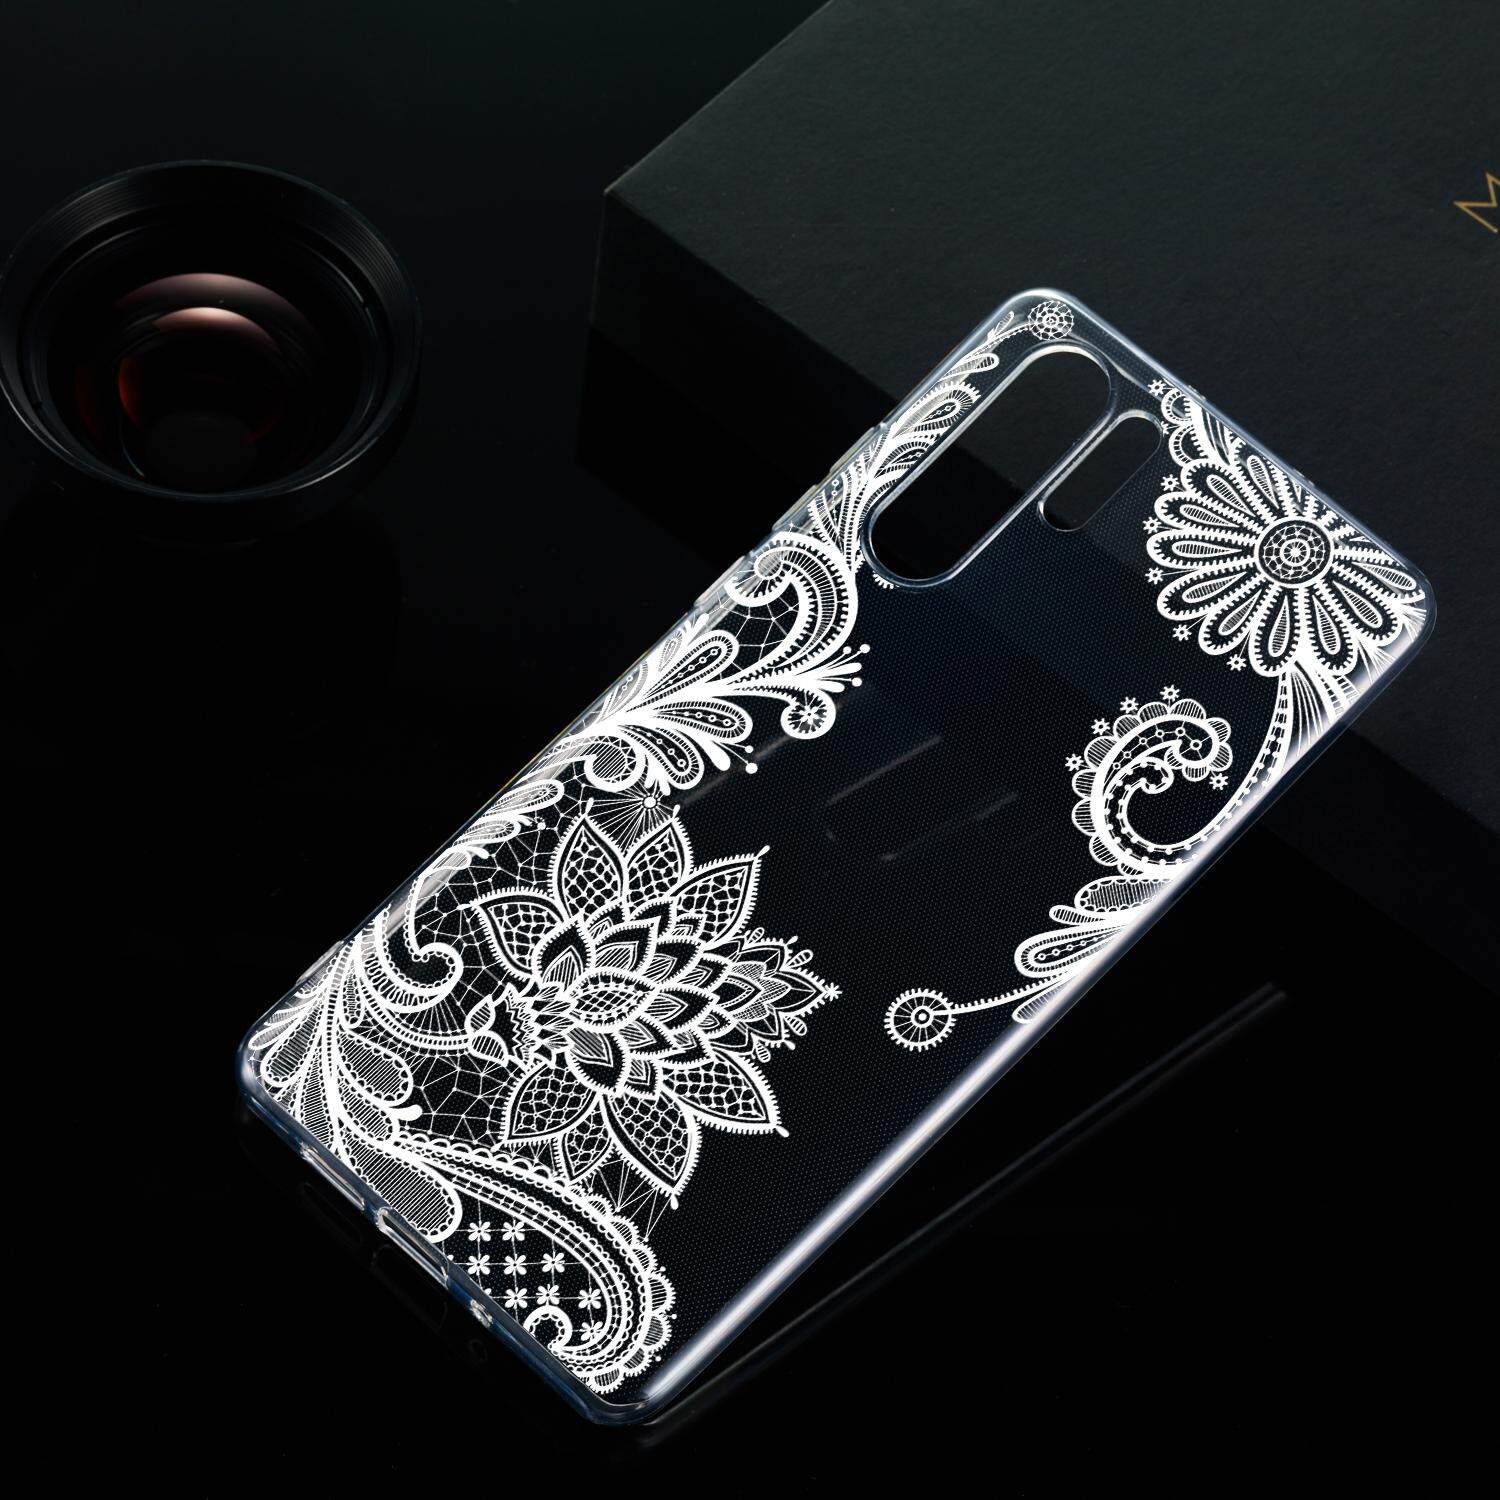 Kriss Case Cover For Huawei P30 Pro Case Hollow Out Painting Soft Tpu Phone Case Anti Scratch Protective Cover White Lace - game roblox soft tpu phone case for huawei p20 p20 lite p10